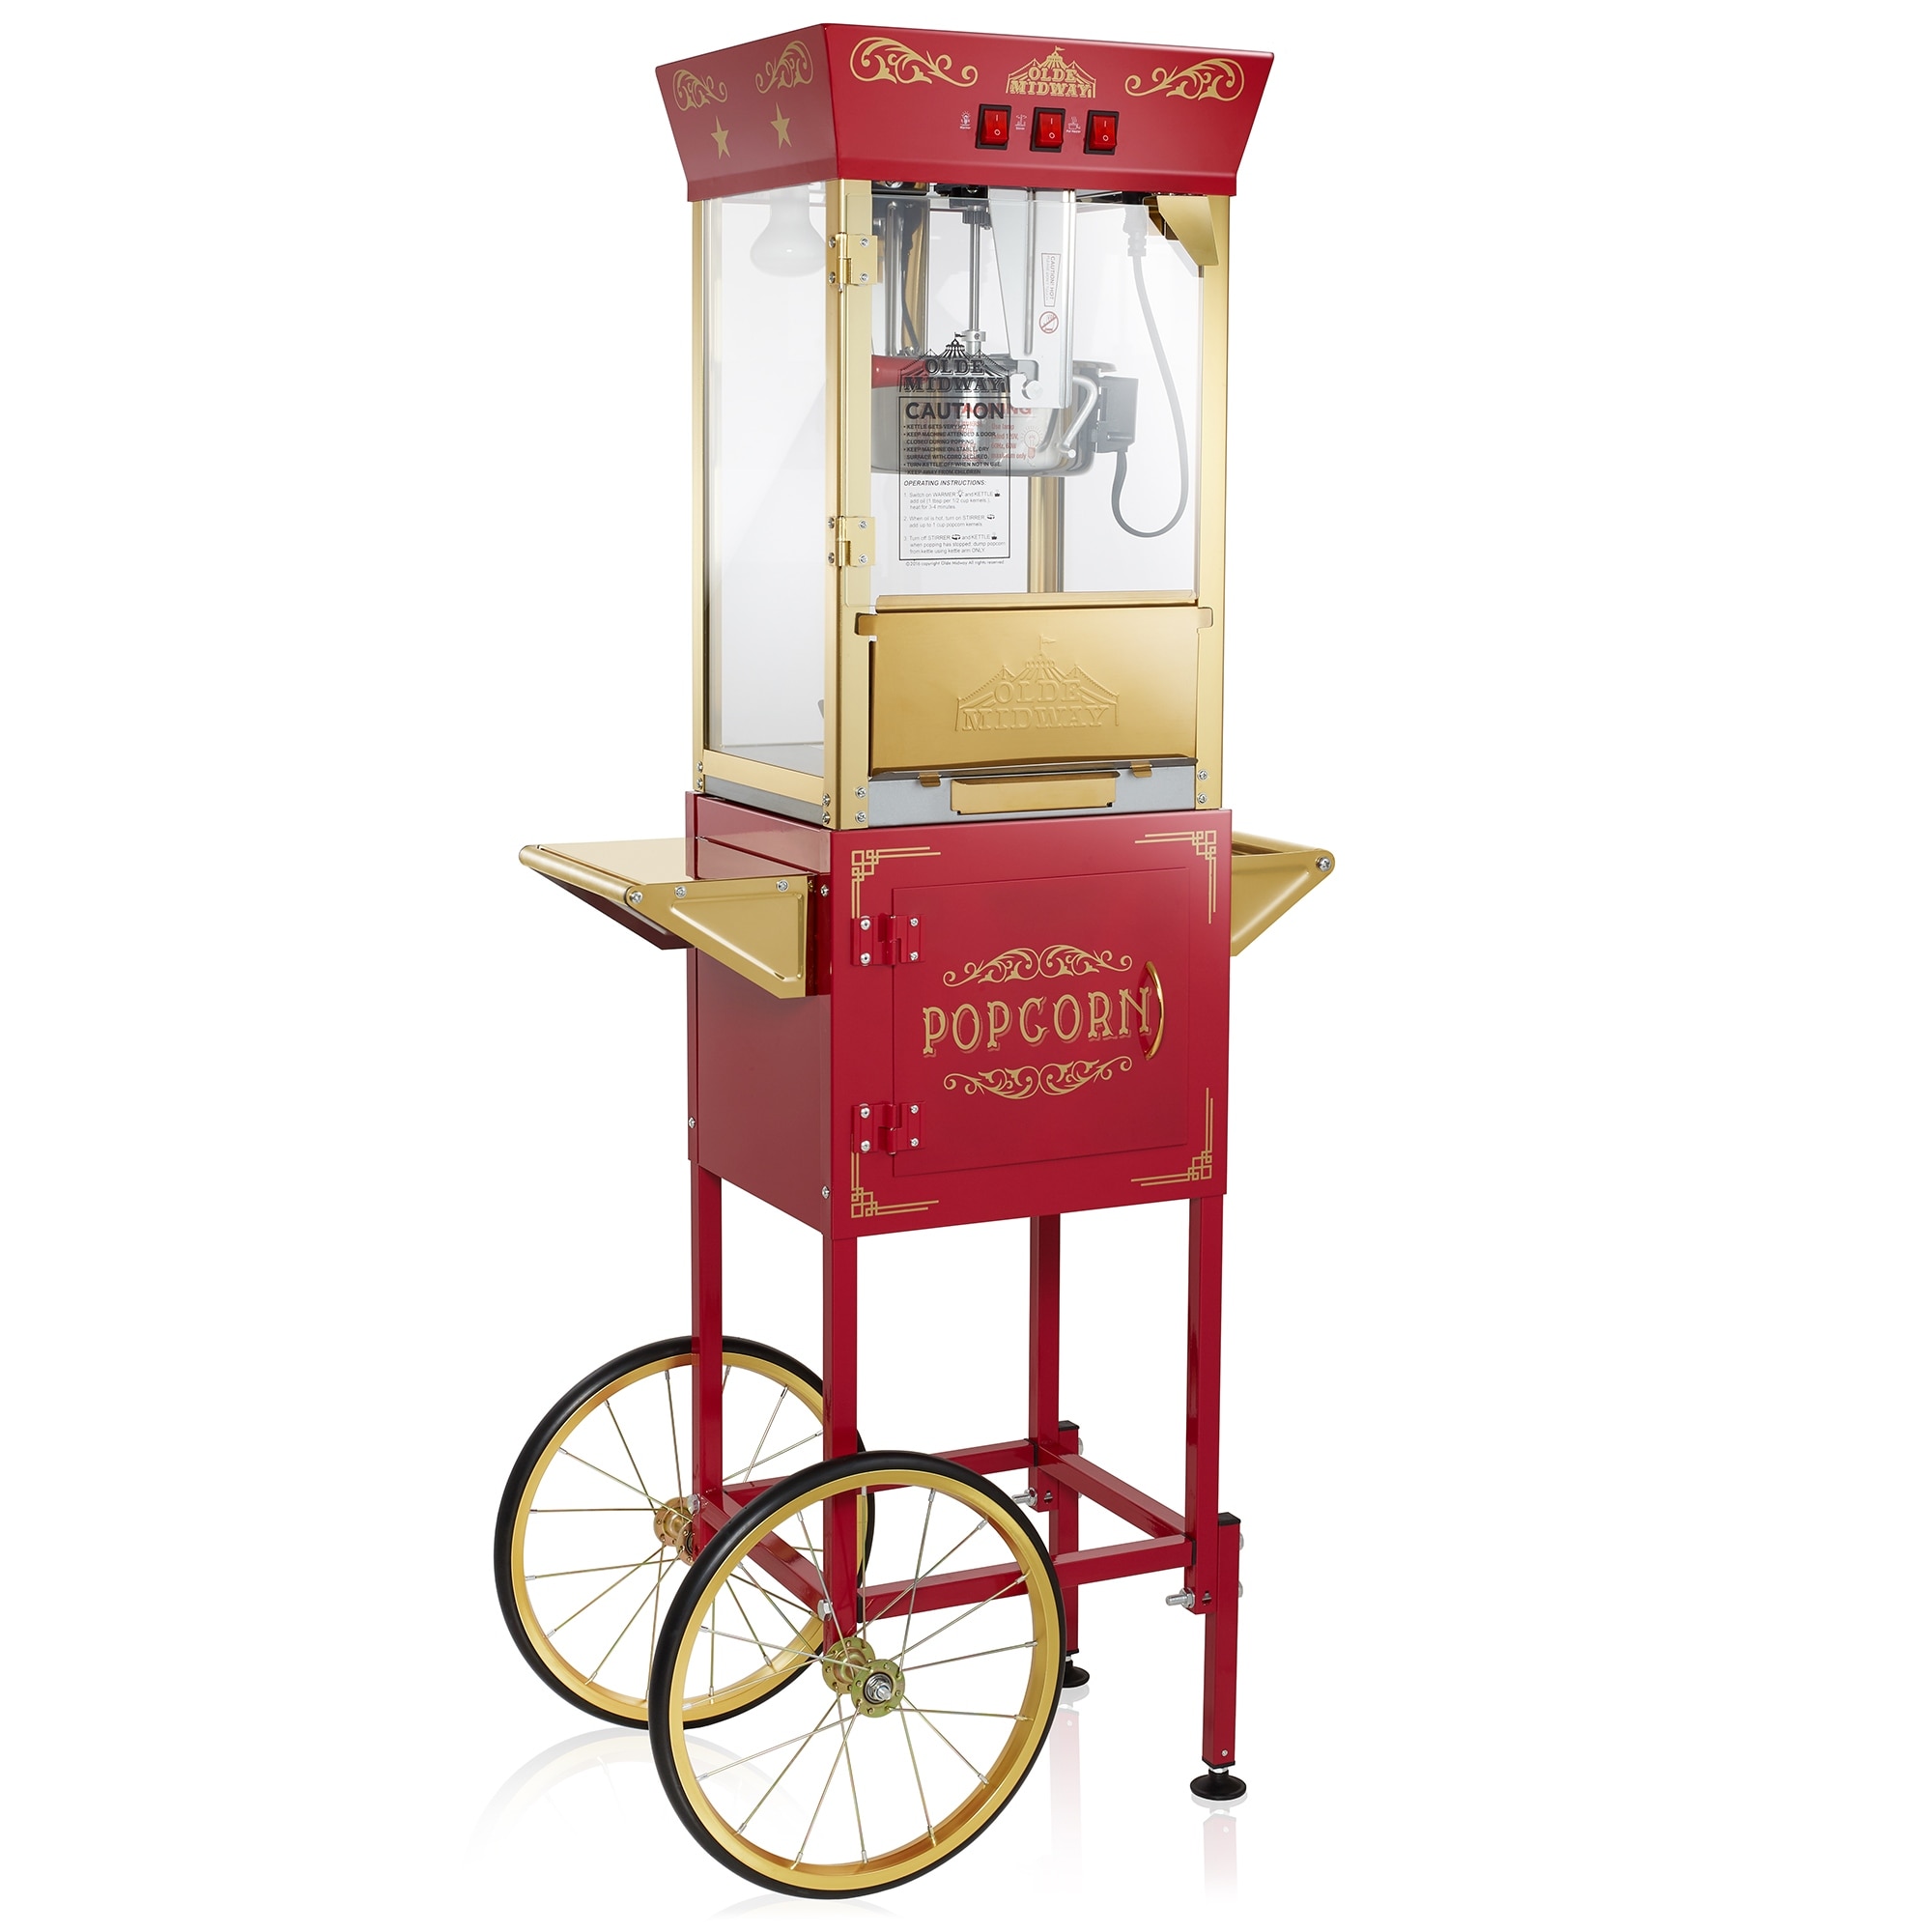 https://ak1.ostkcdn.com/images/products/is/images/direct/16edd53ee735fddc26b91521ecaf81ed25f1cc5c/Movie-Theater-Style-Popcorn-Machine-with-Cart-and-8-oz-Kettle.jpg